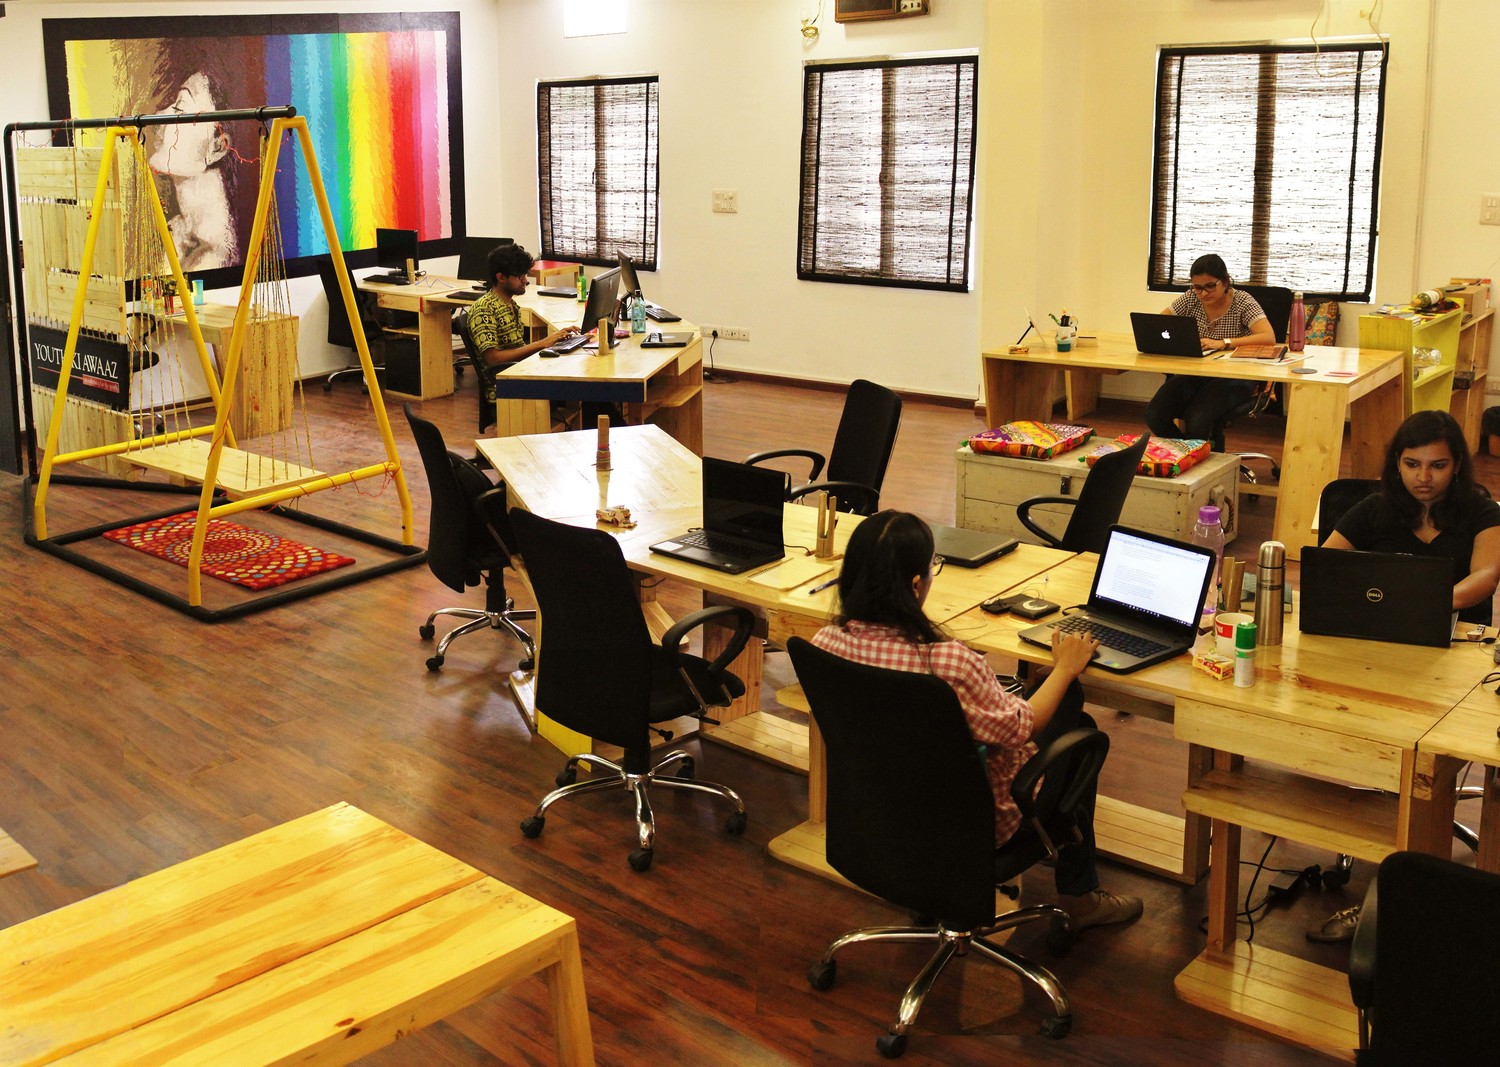 Recycled, low-cost, youthful office design speaks the language of 'Youth Ki  Awaaz' — MaterialDriven